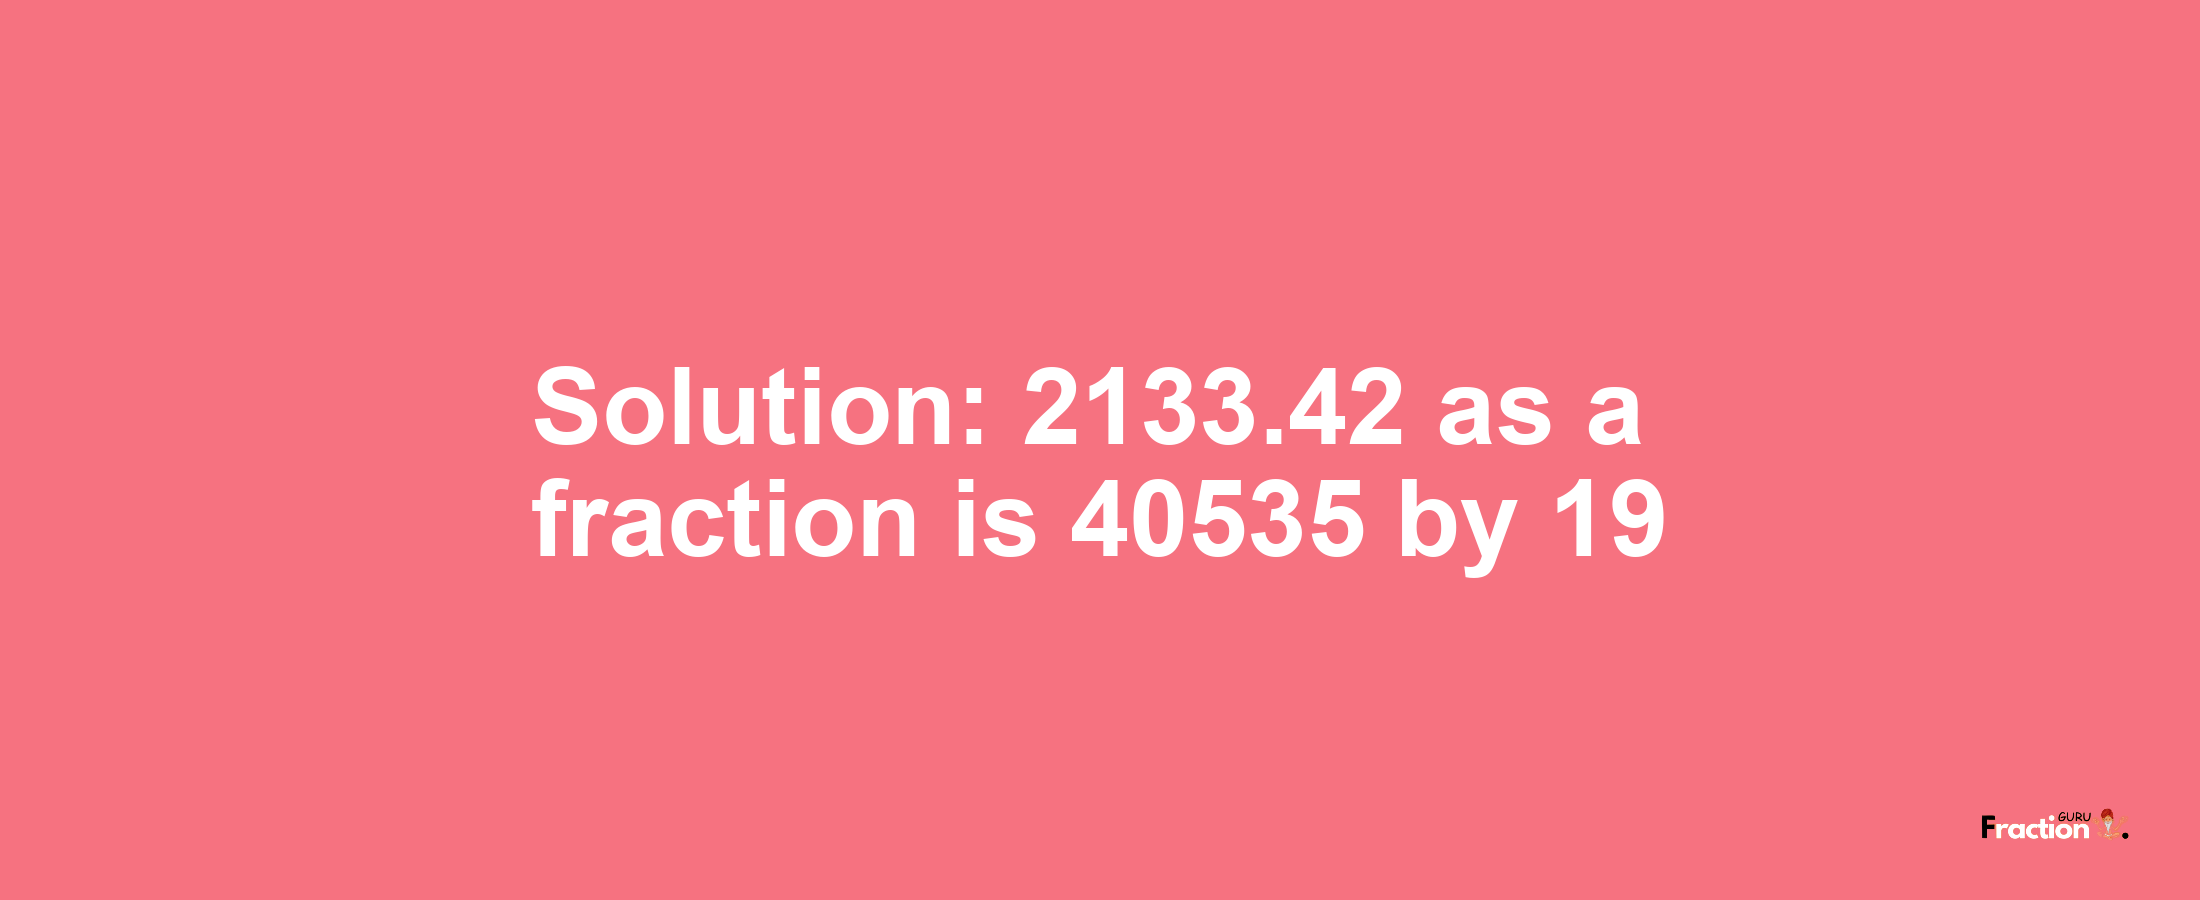 Solution:2133.42 as a fraction is 40535/19